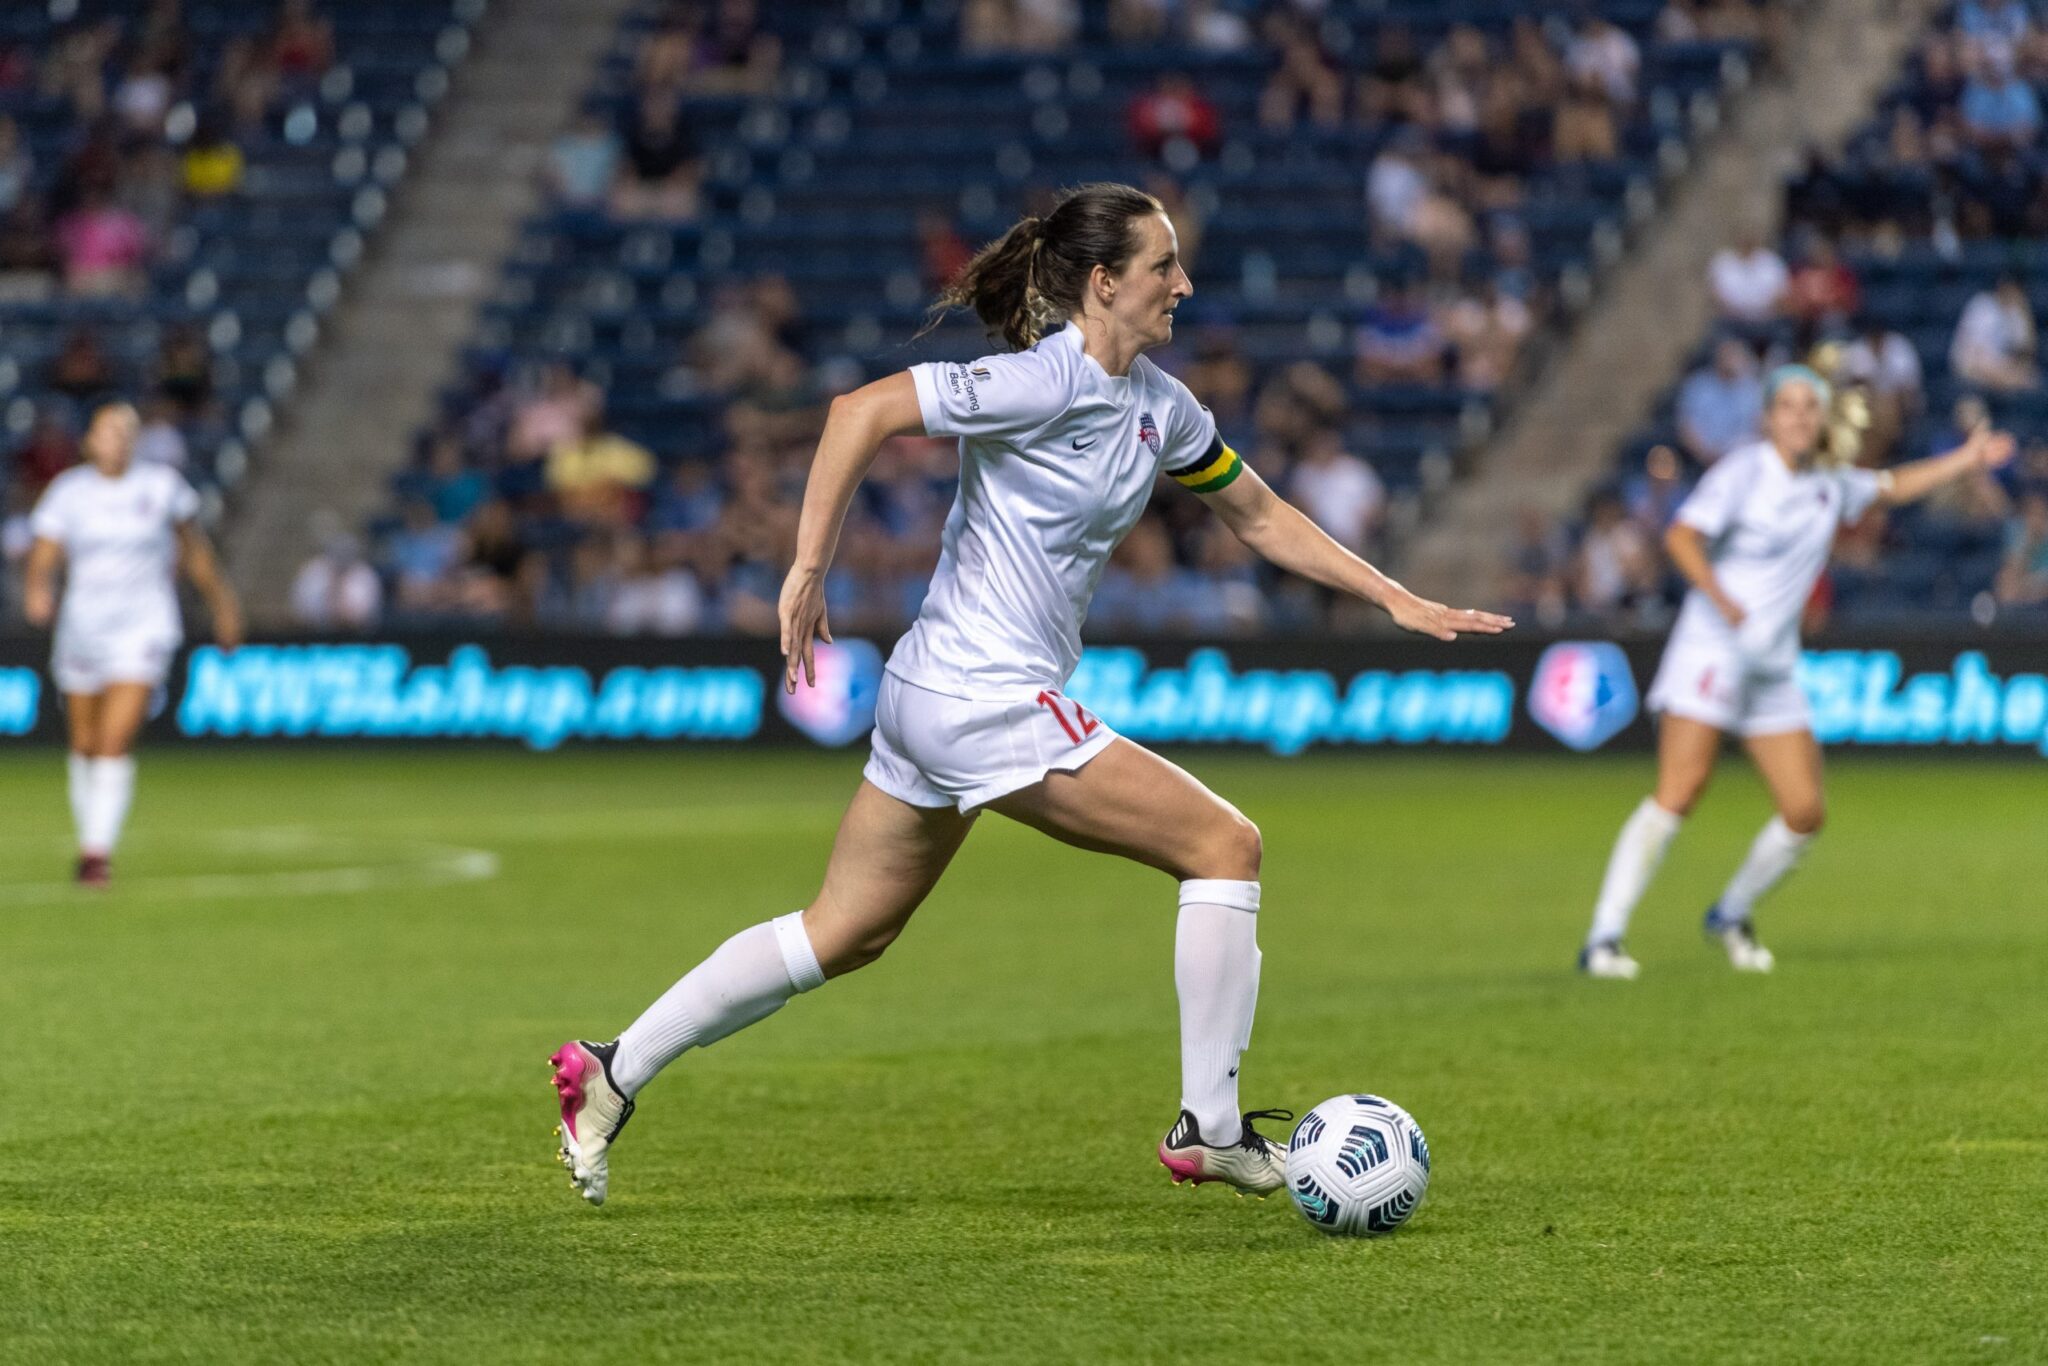 Spirit Look to Capture Win in First-Ever Meeting Against KC NWSL Featured Image